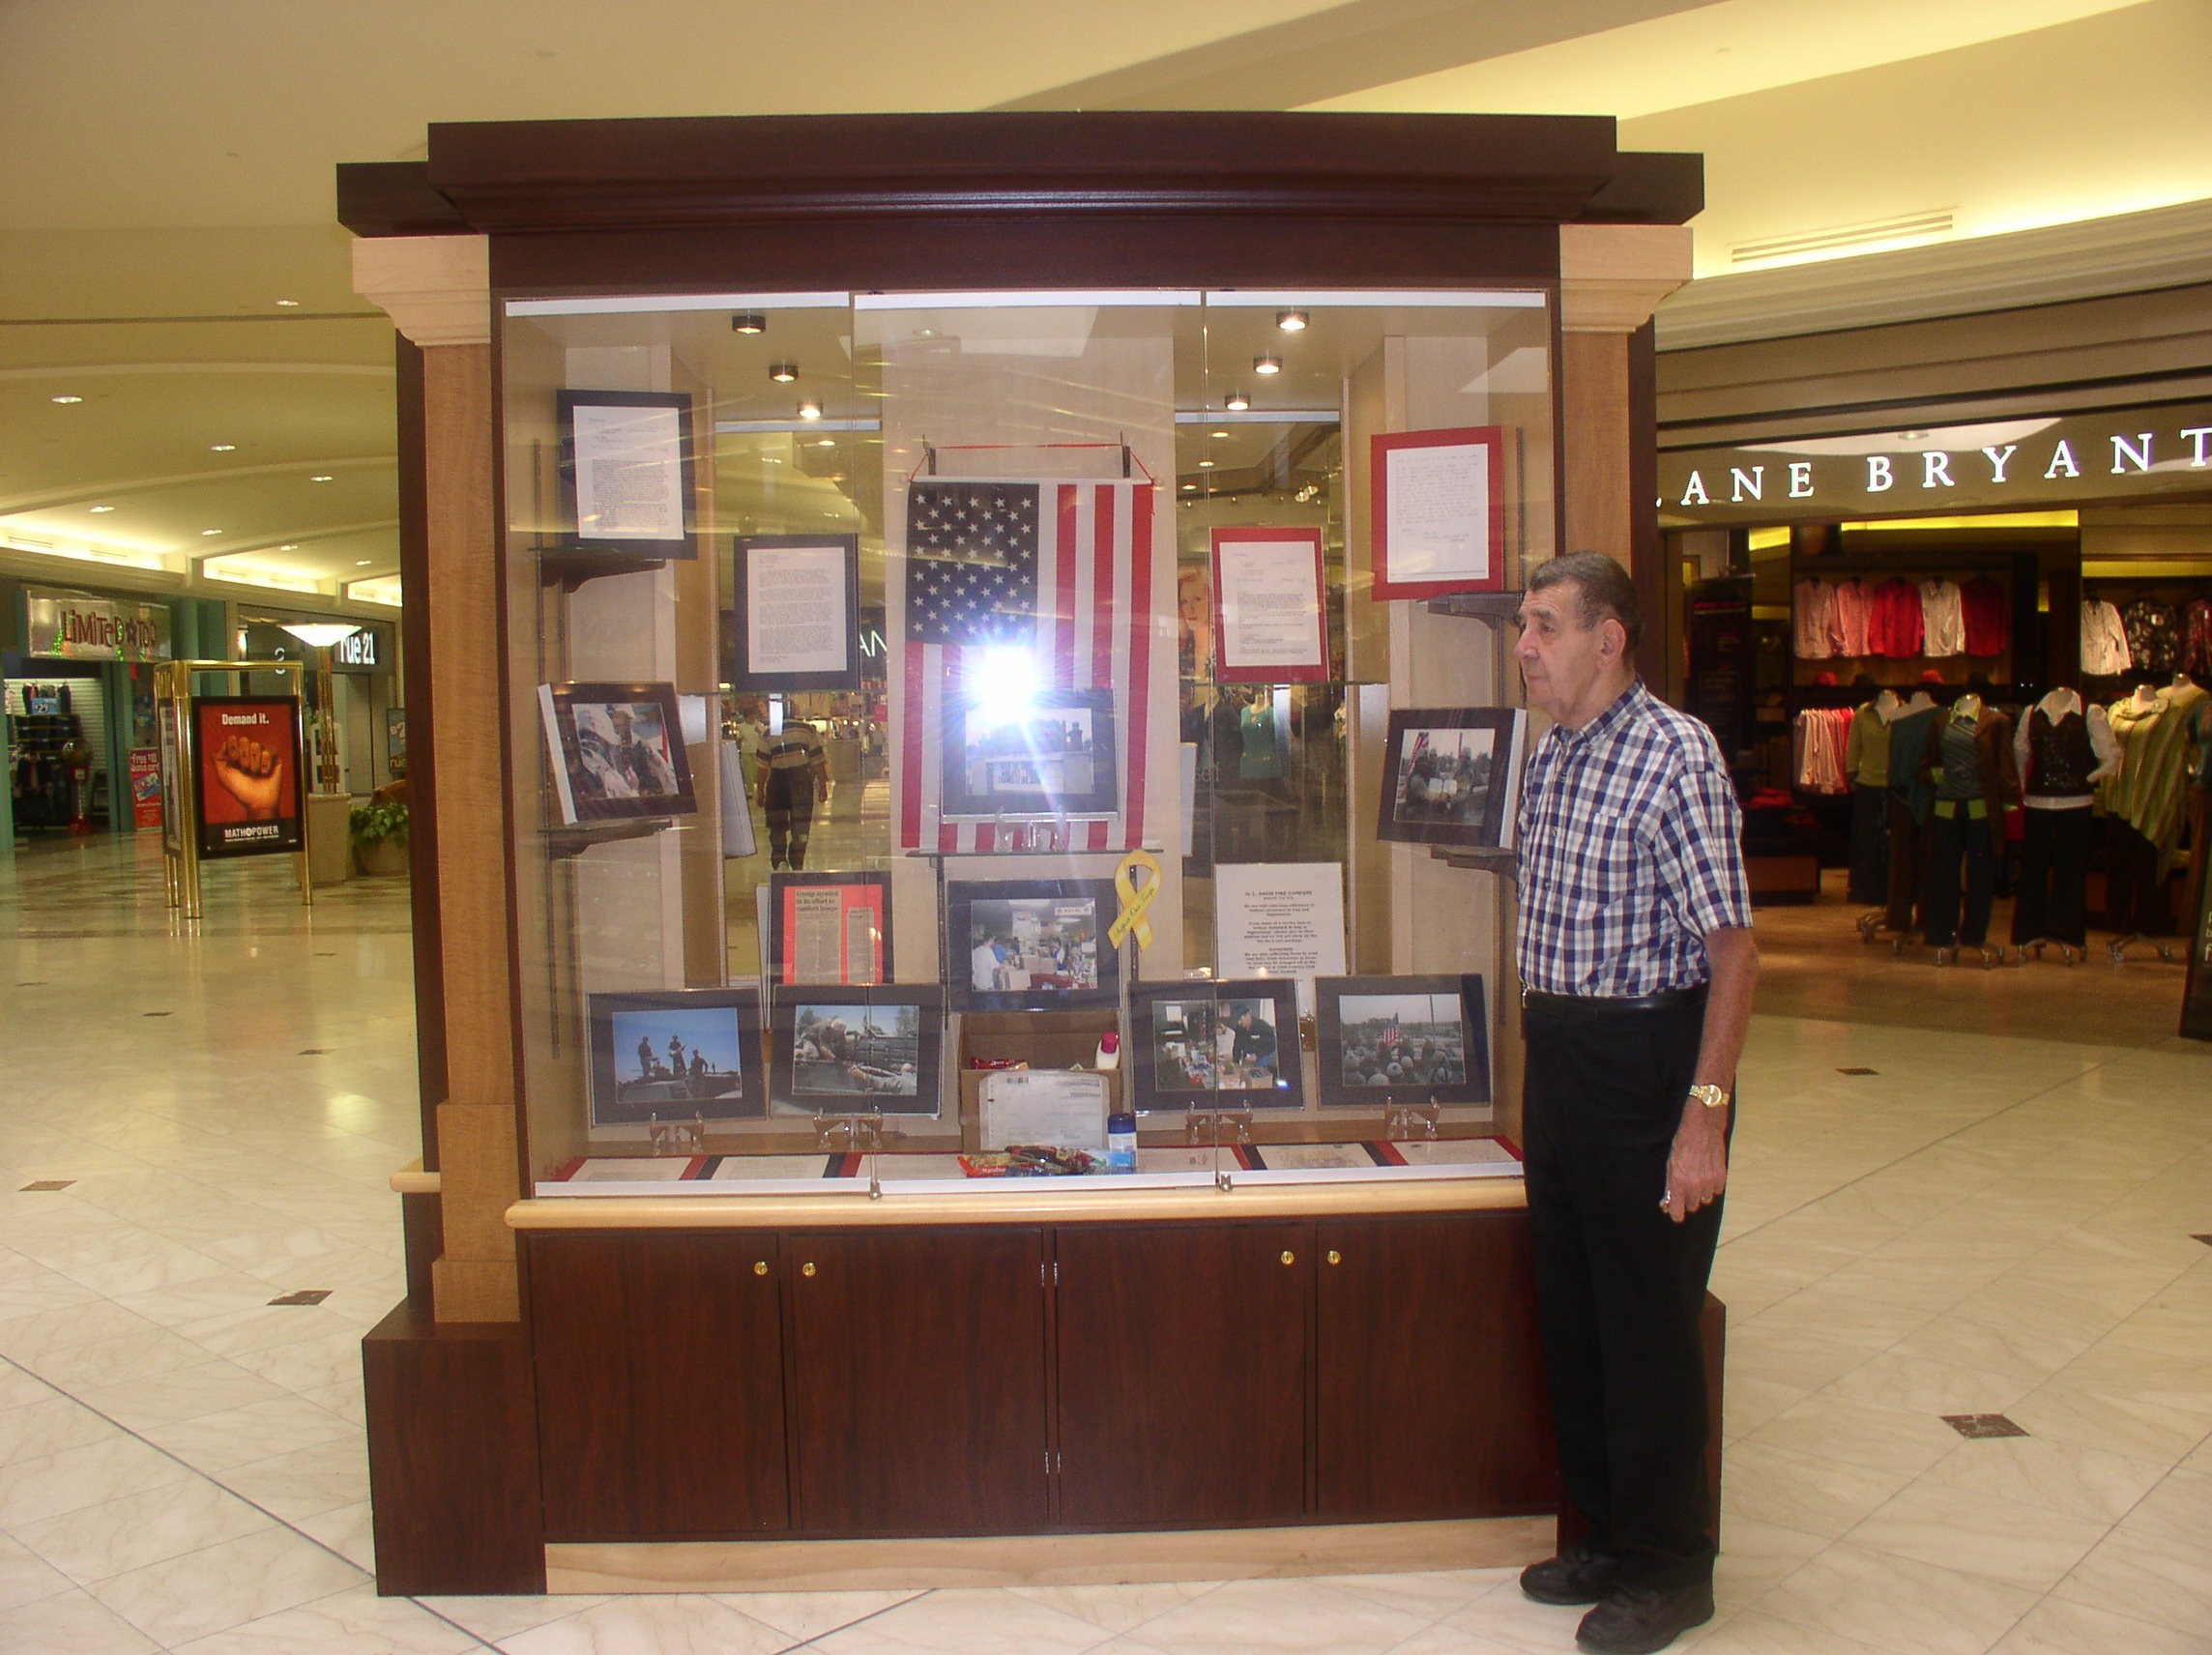 09-11-04  Other - Mall Display